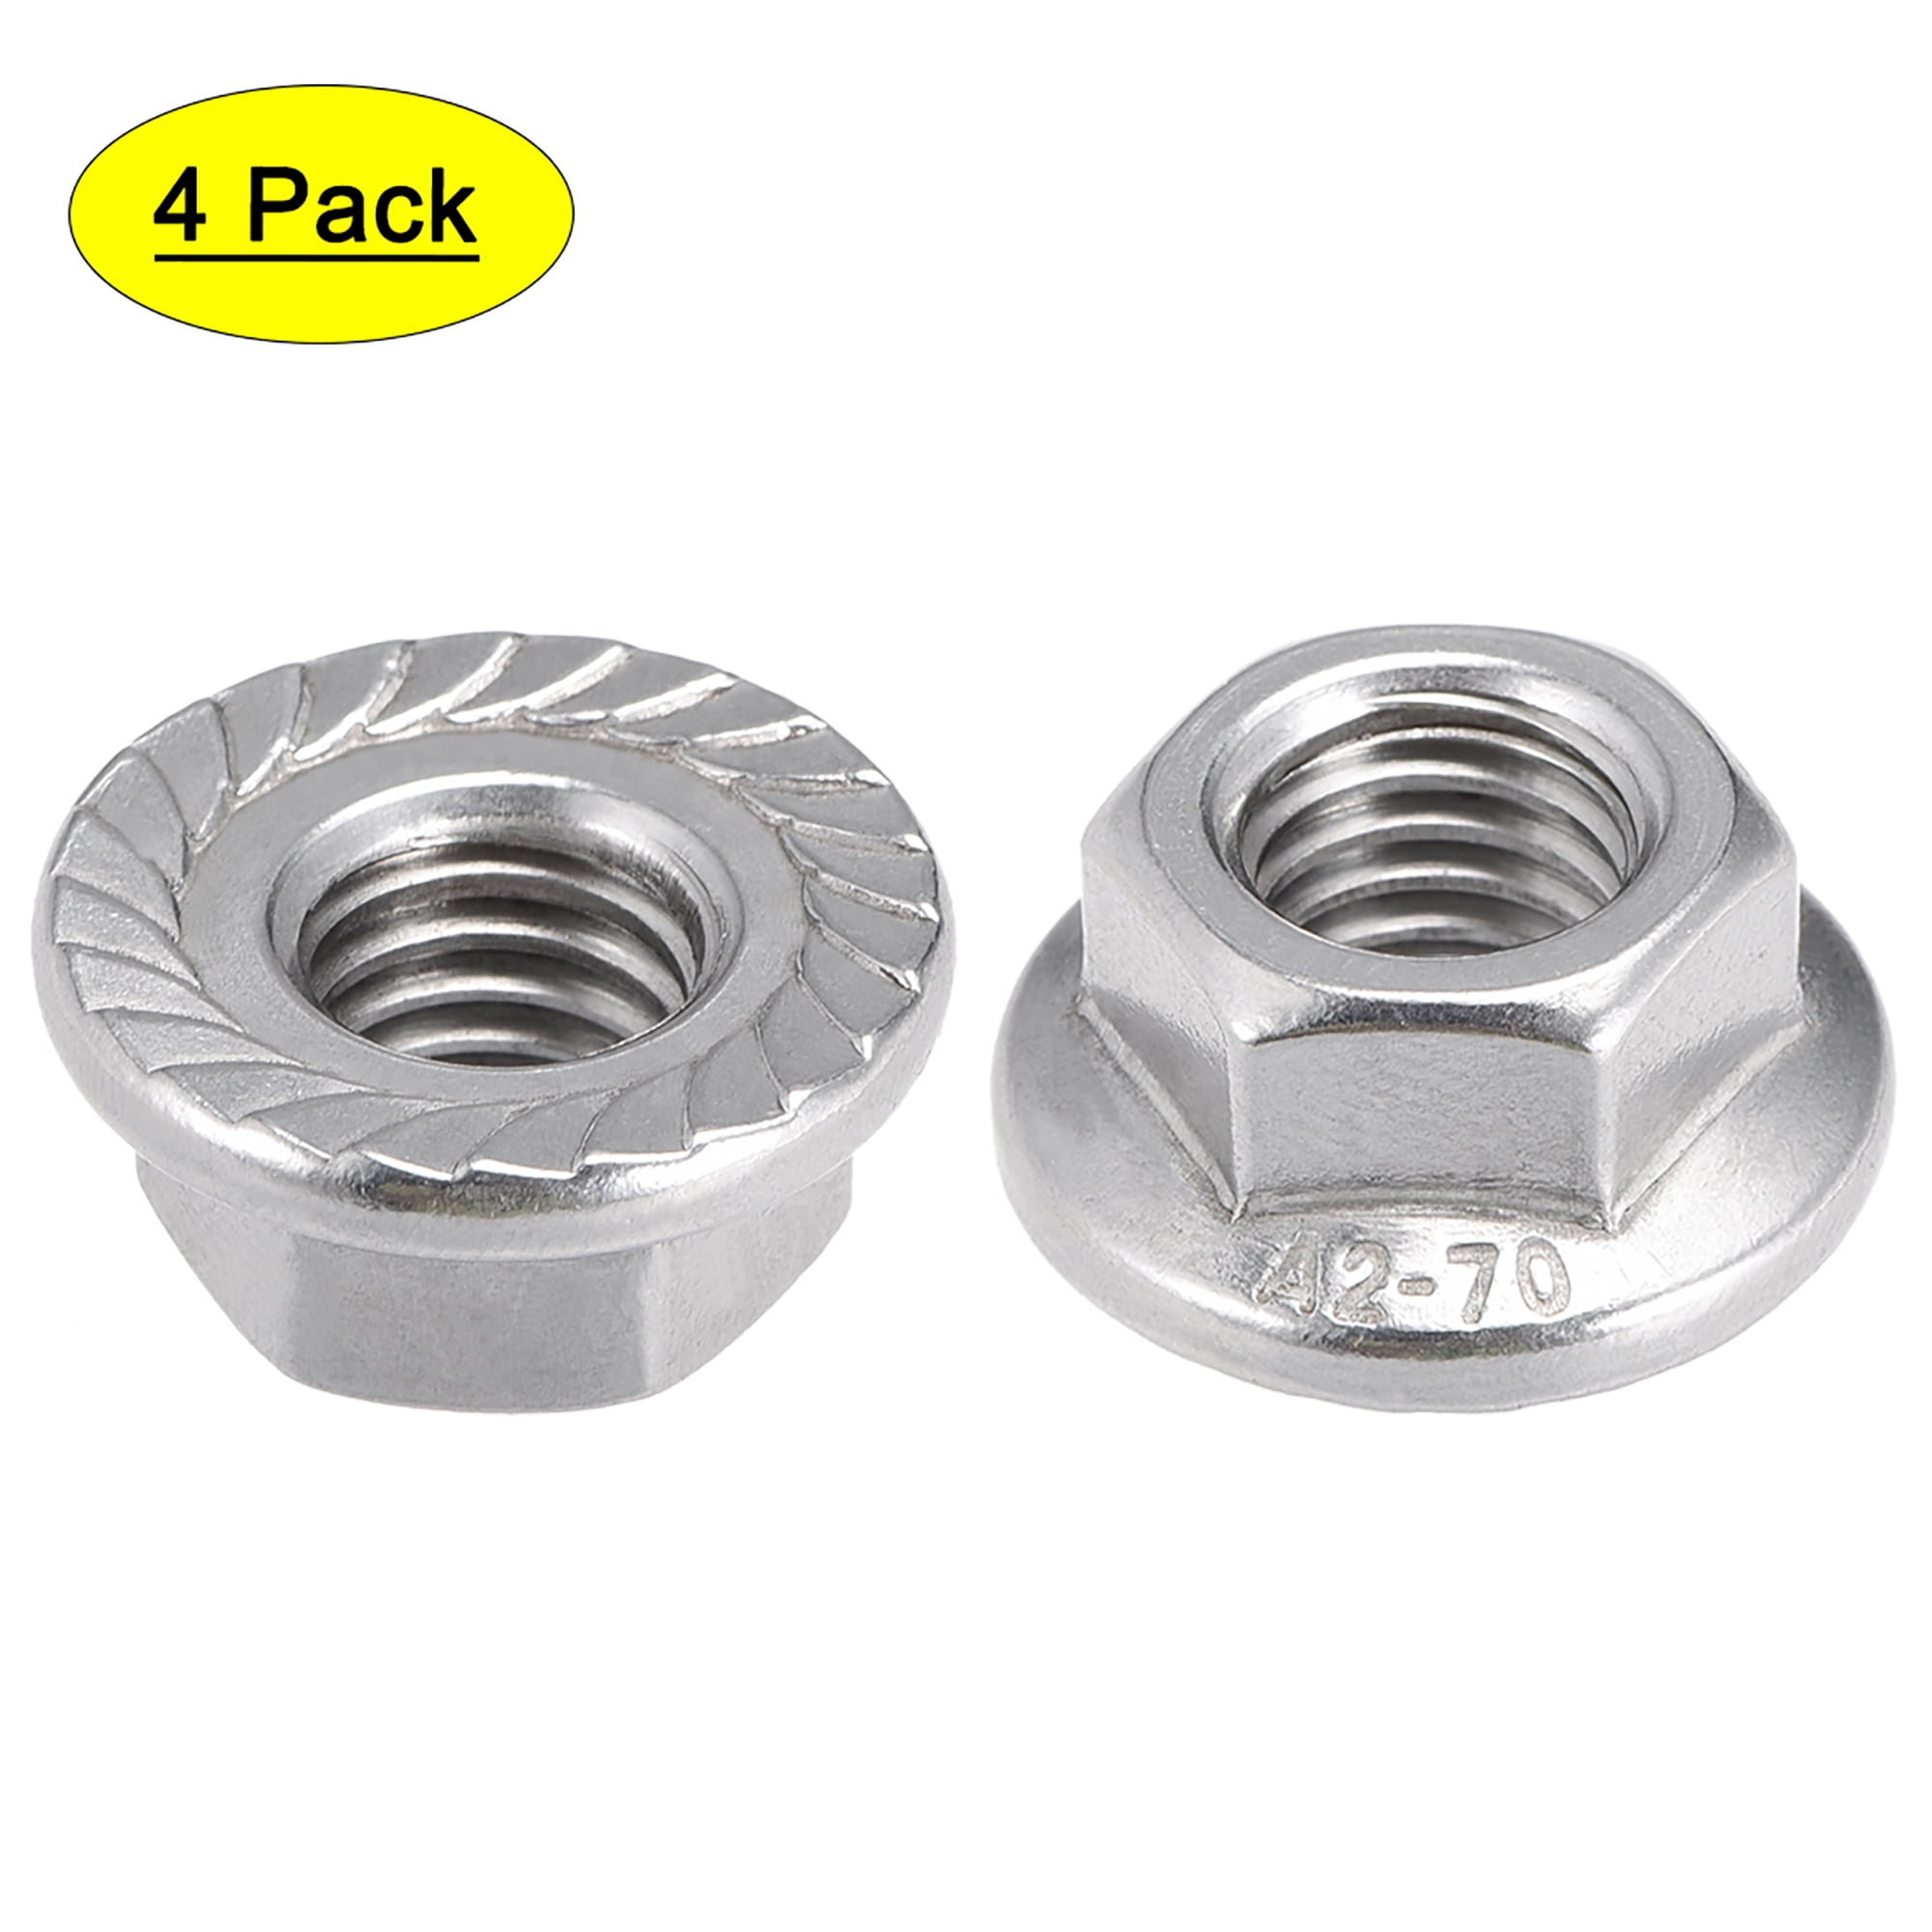 A2 M10 Stainless Steel Serrated Flange Flanged Nut 20 Pack 